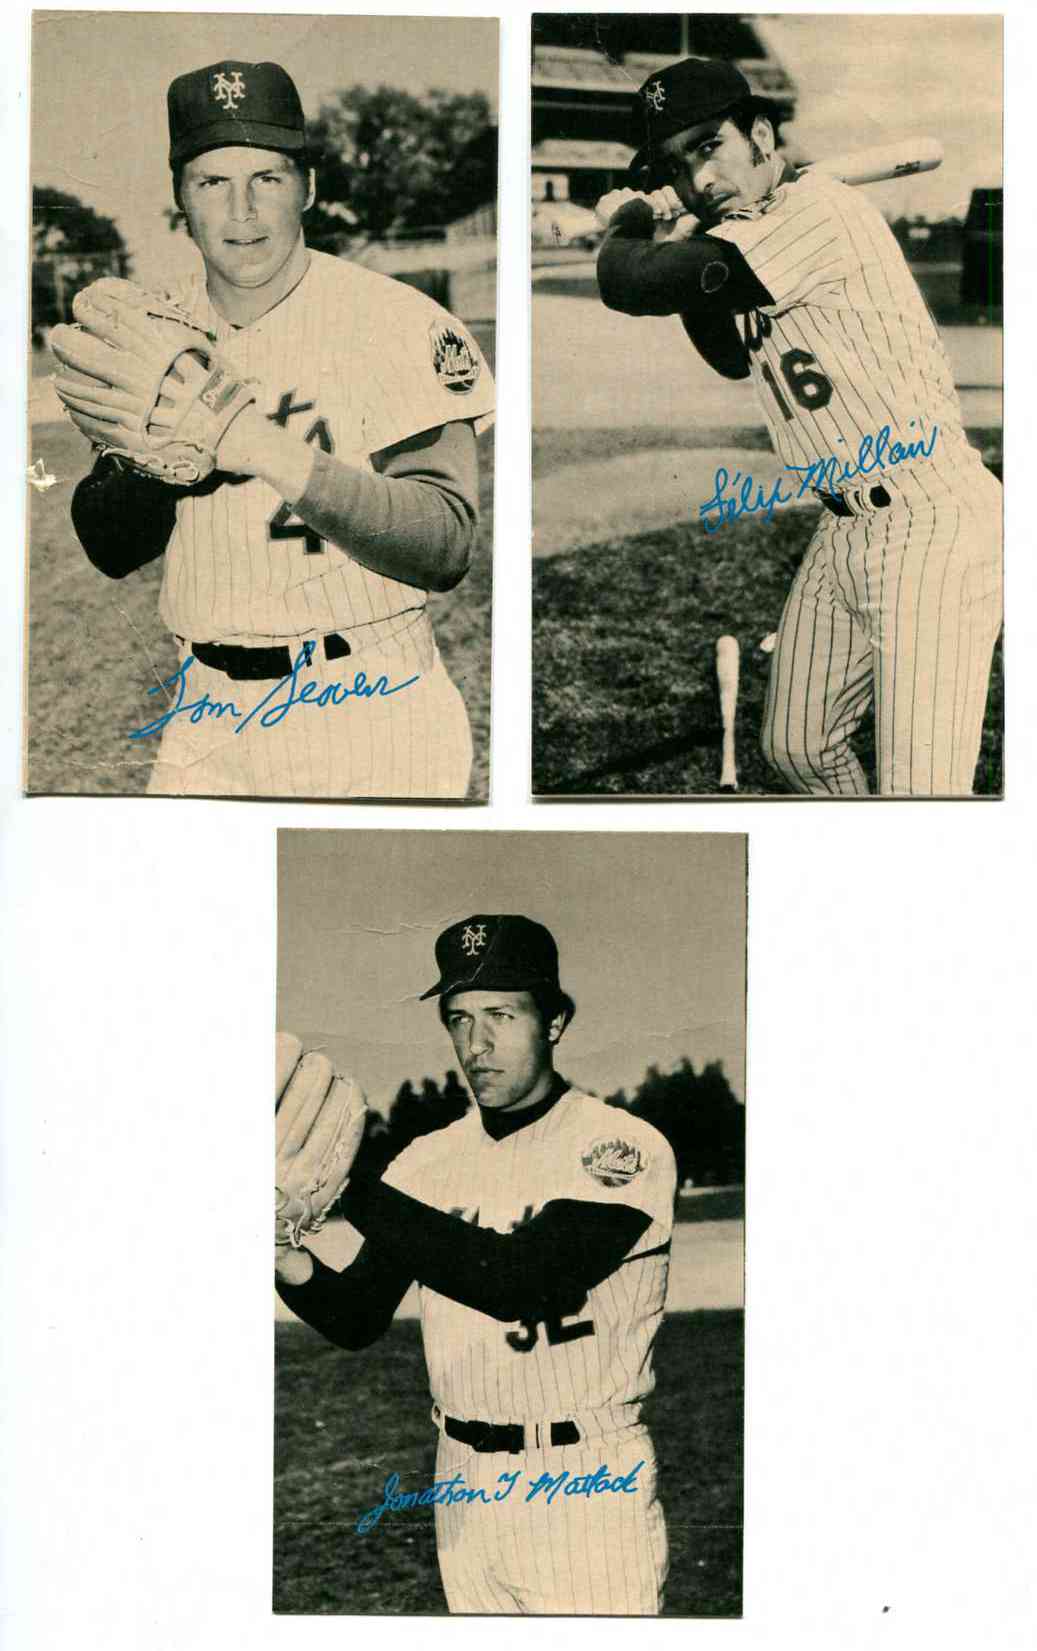  Mets Team Set - 1974 Topps Deckle Edge PROOFS [WB] (3 cards) w/TOM SEAVER Baseball cards value